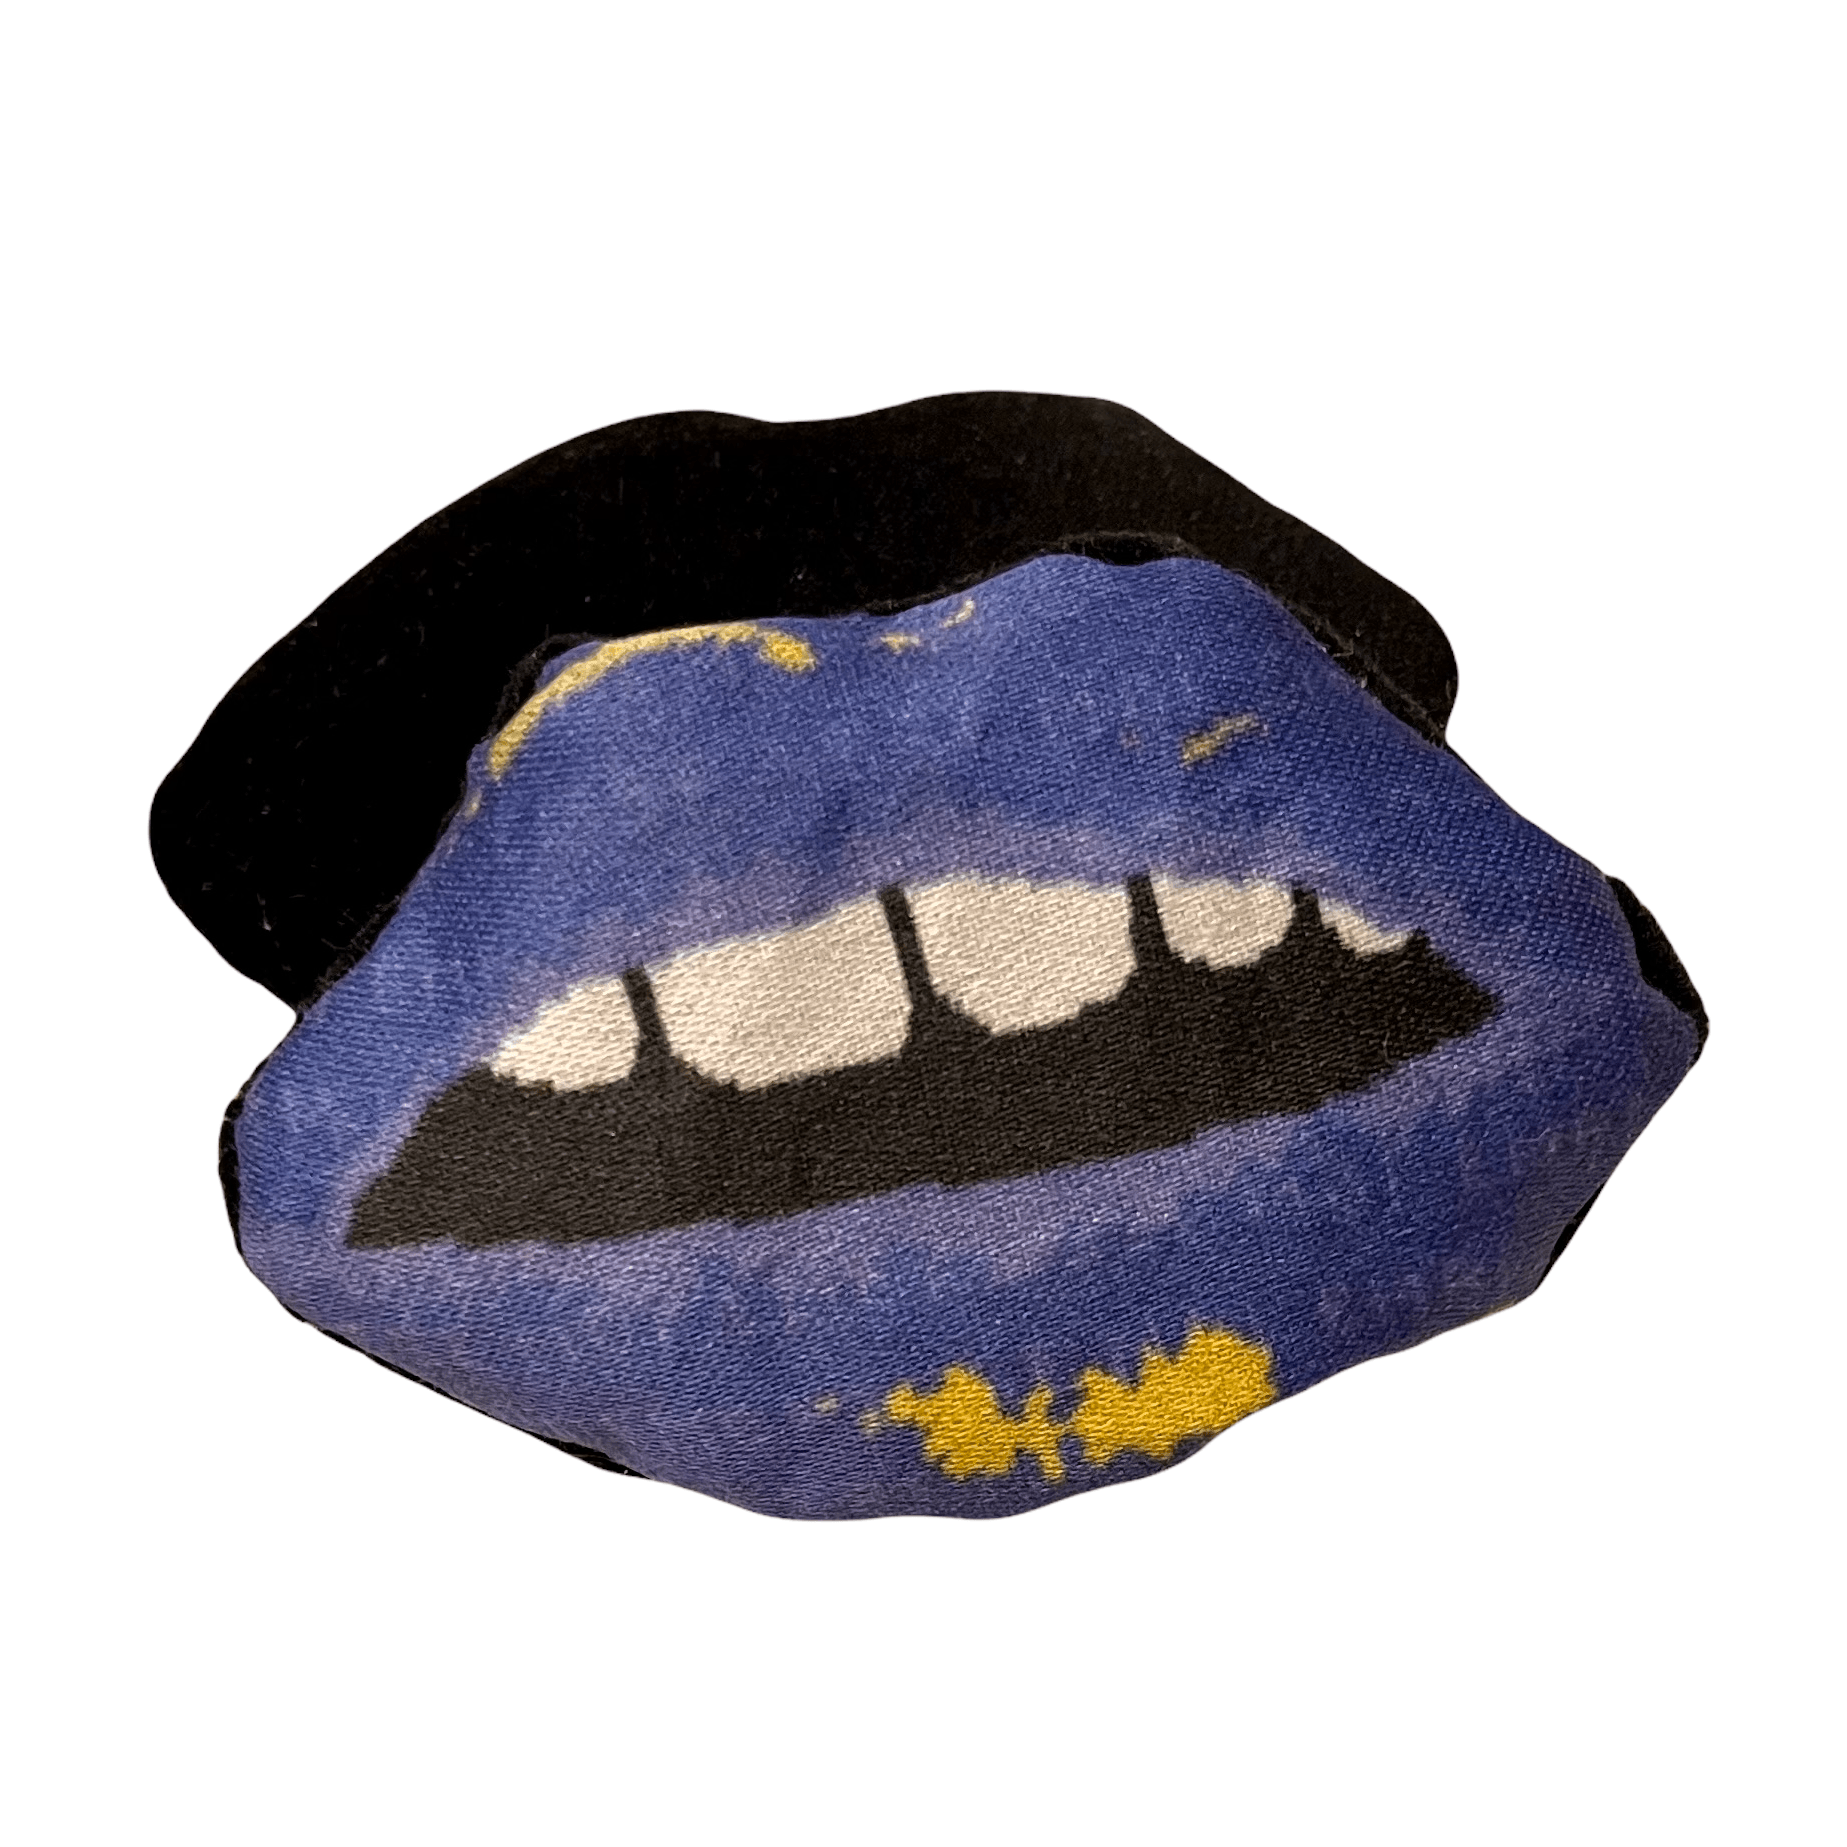 blue lips-shaped lavender sachets with open mouth & gapped teeth